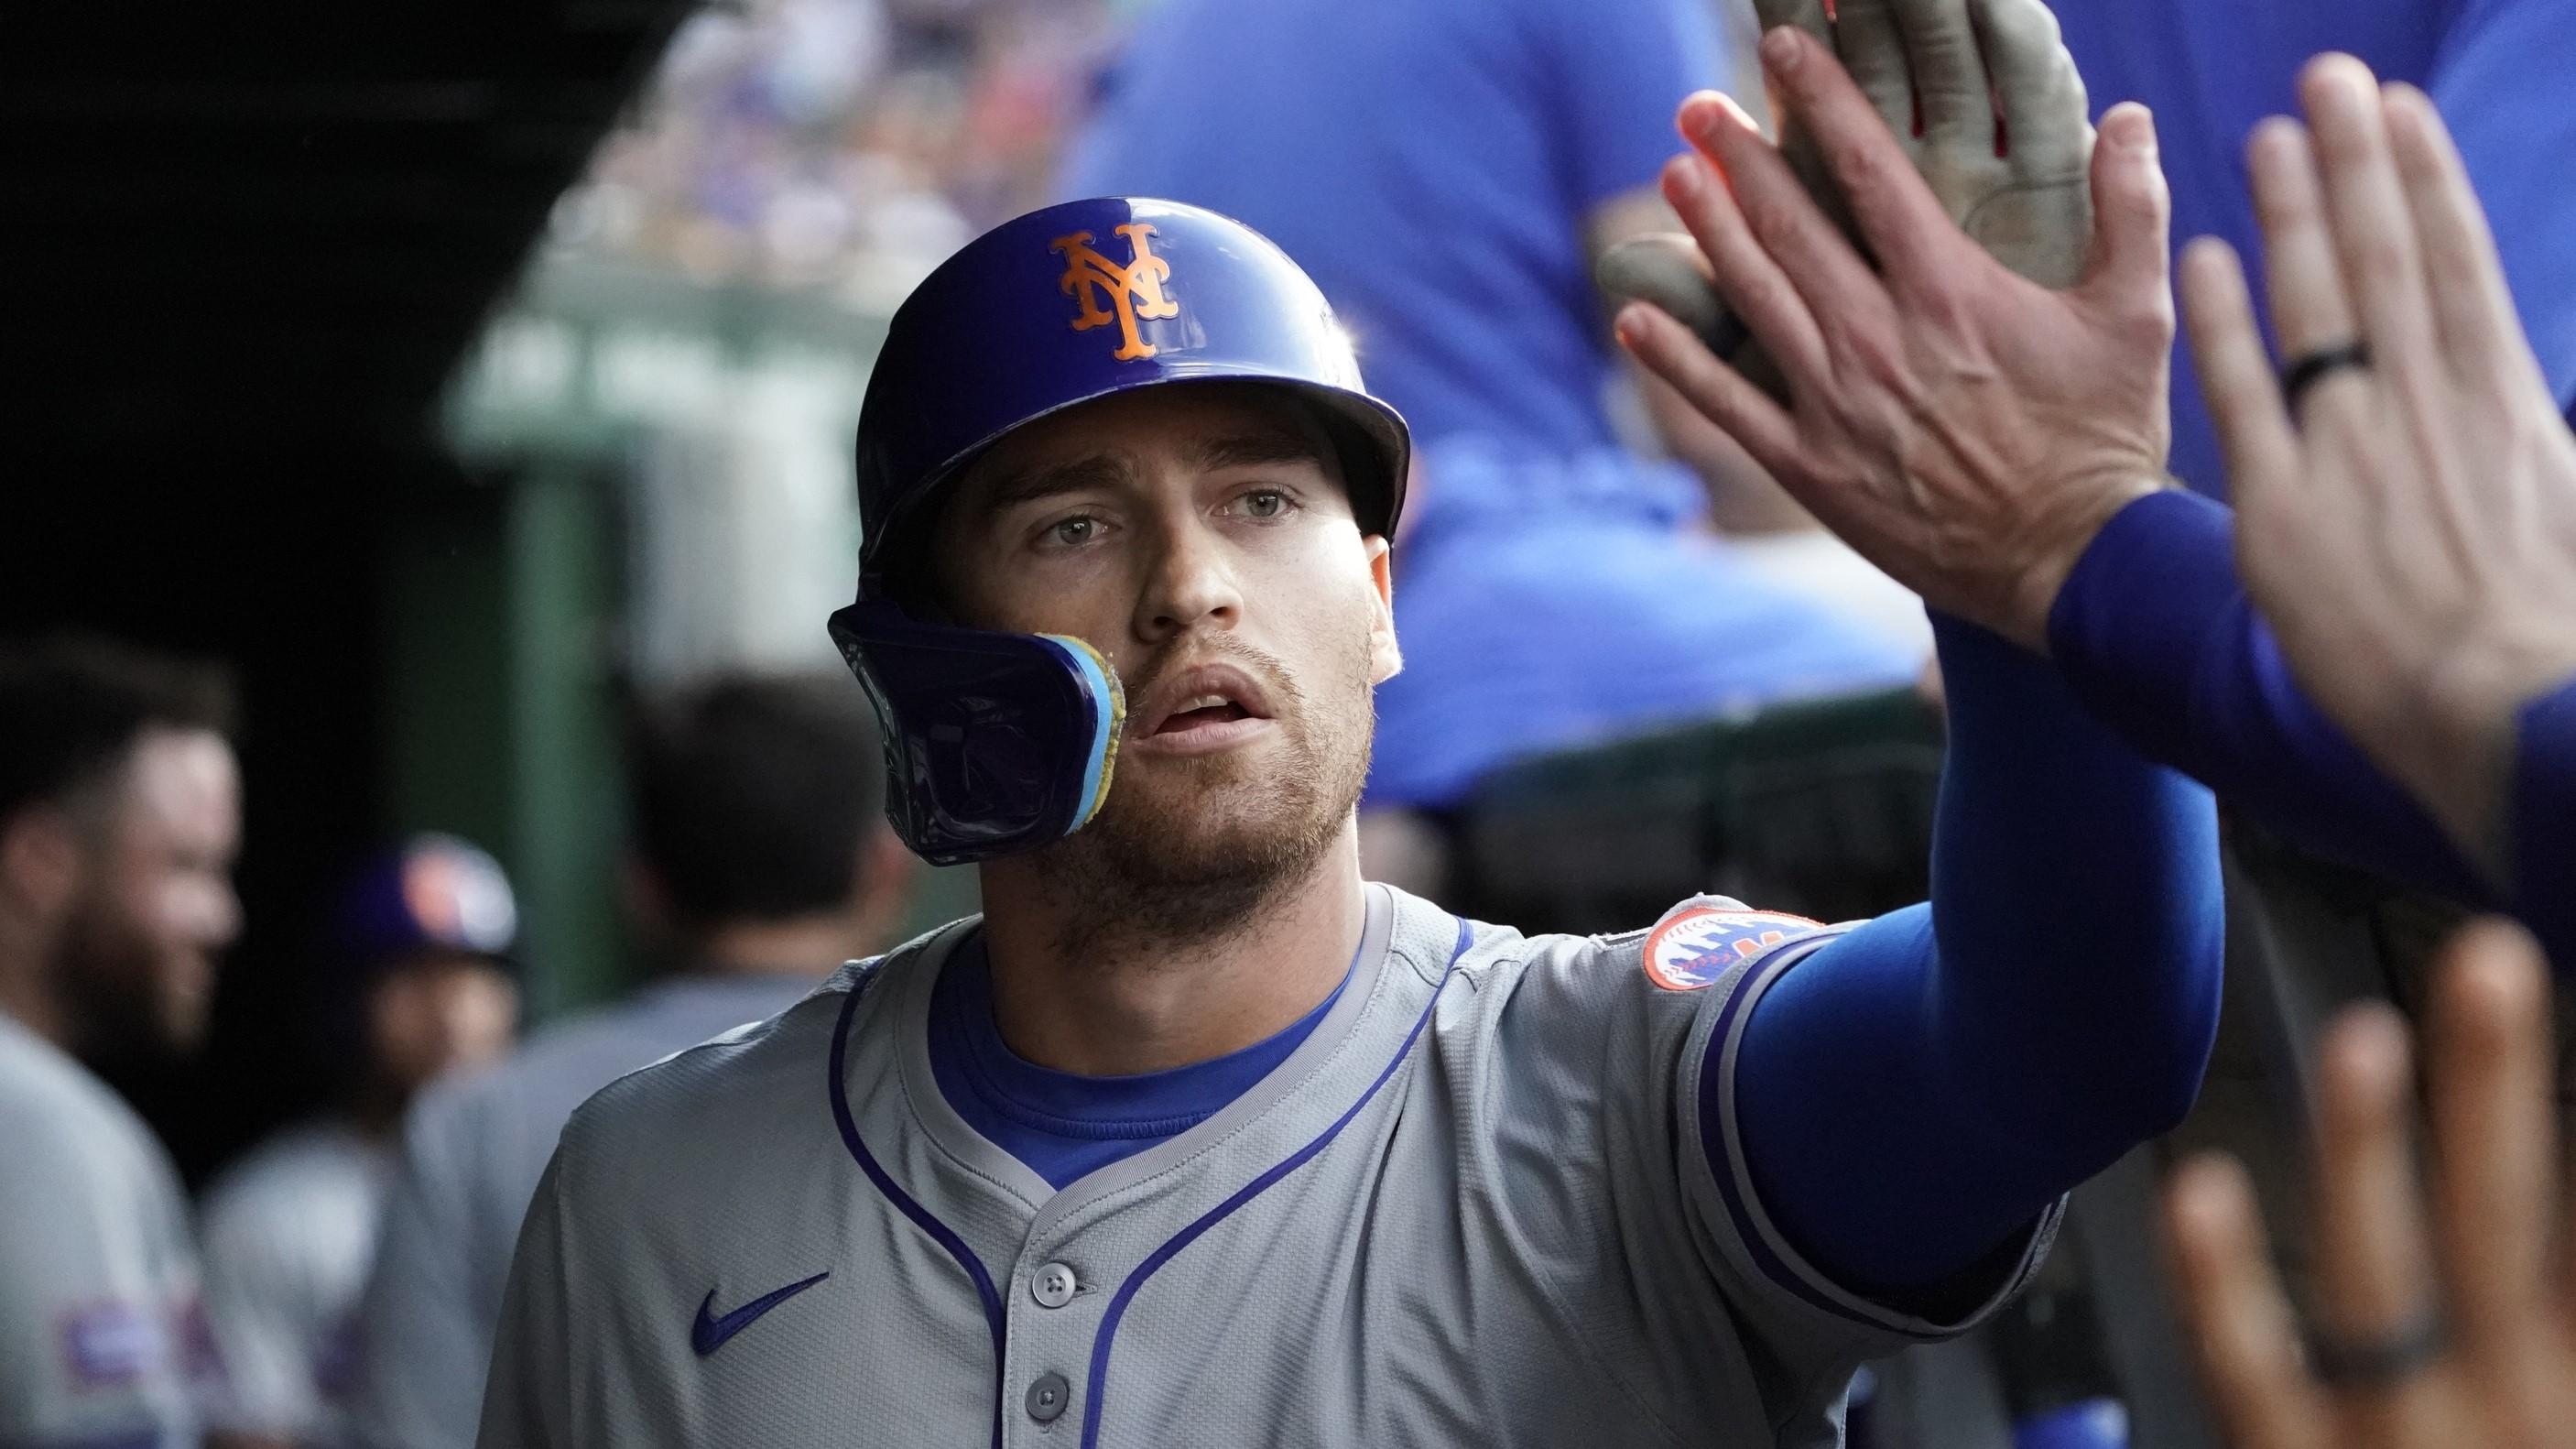 Mets’ Brandon Nimmo relishes clutch moments in win over Nationals following fainting scare